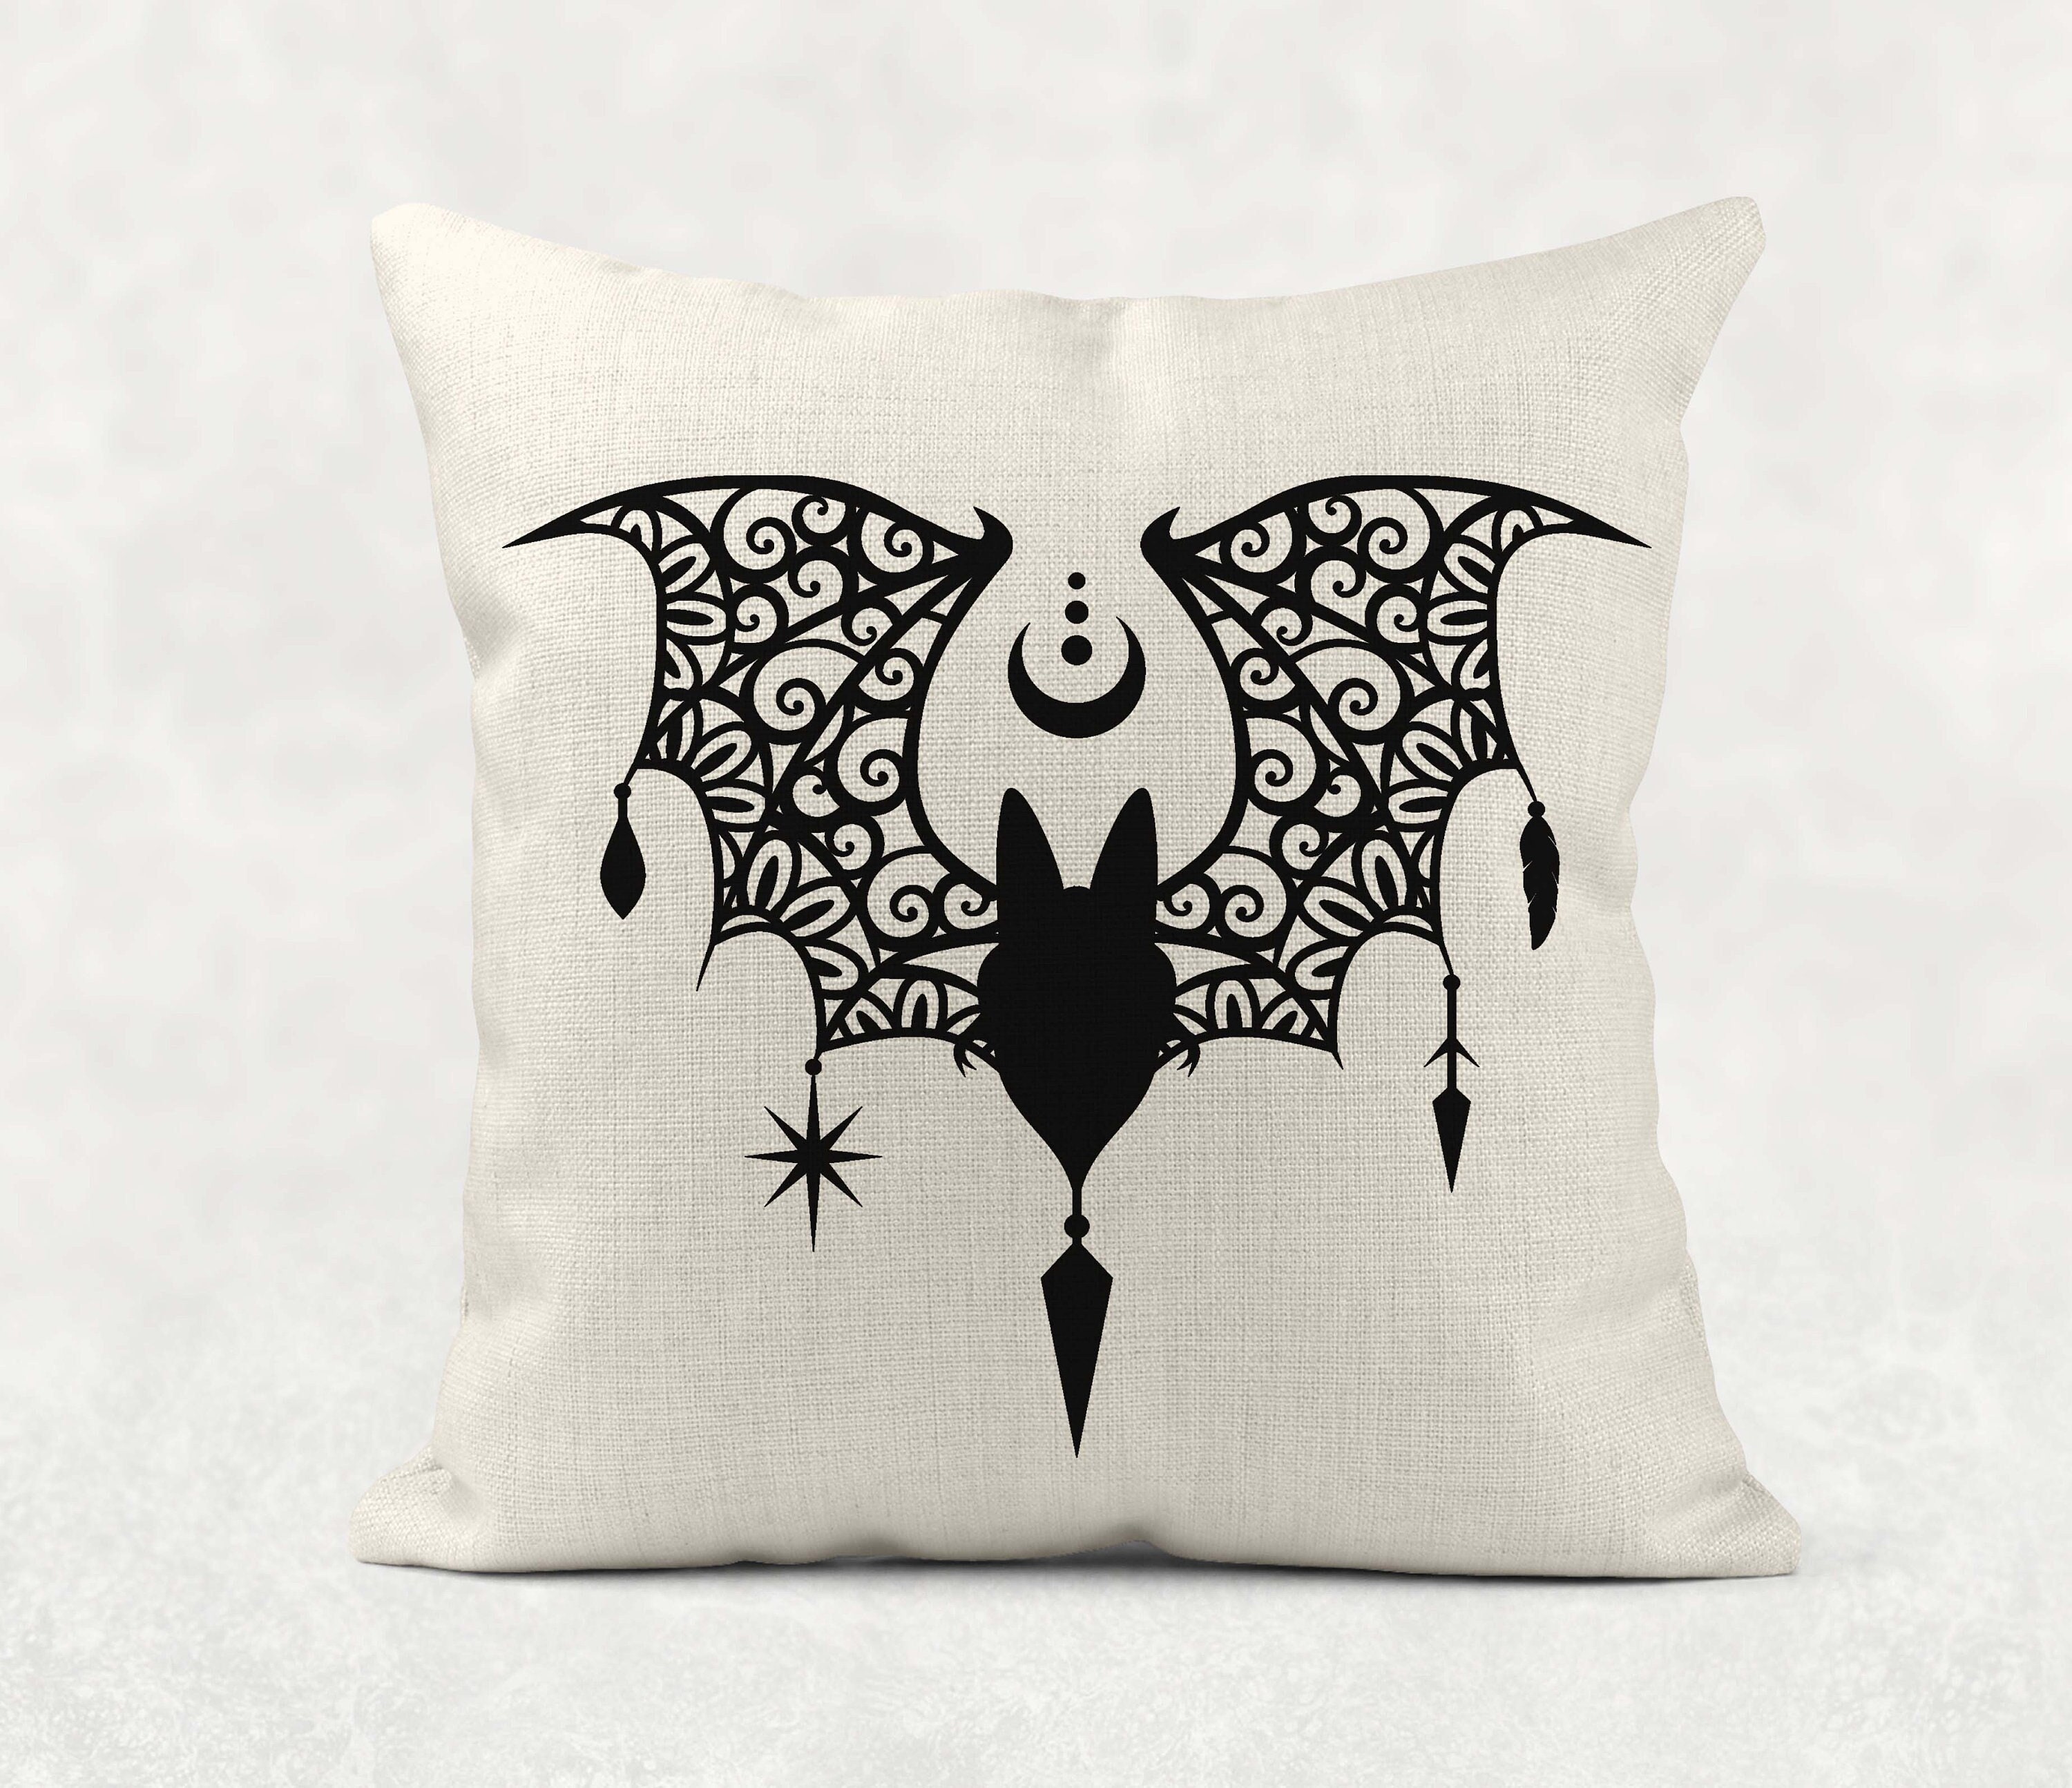 The Grim Boat-Gothic lovers Throw Pillow